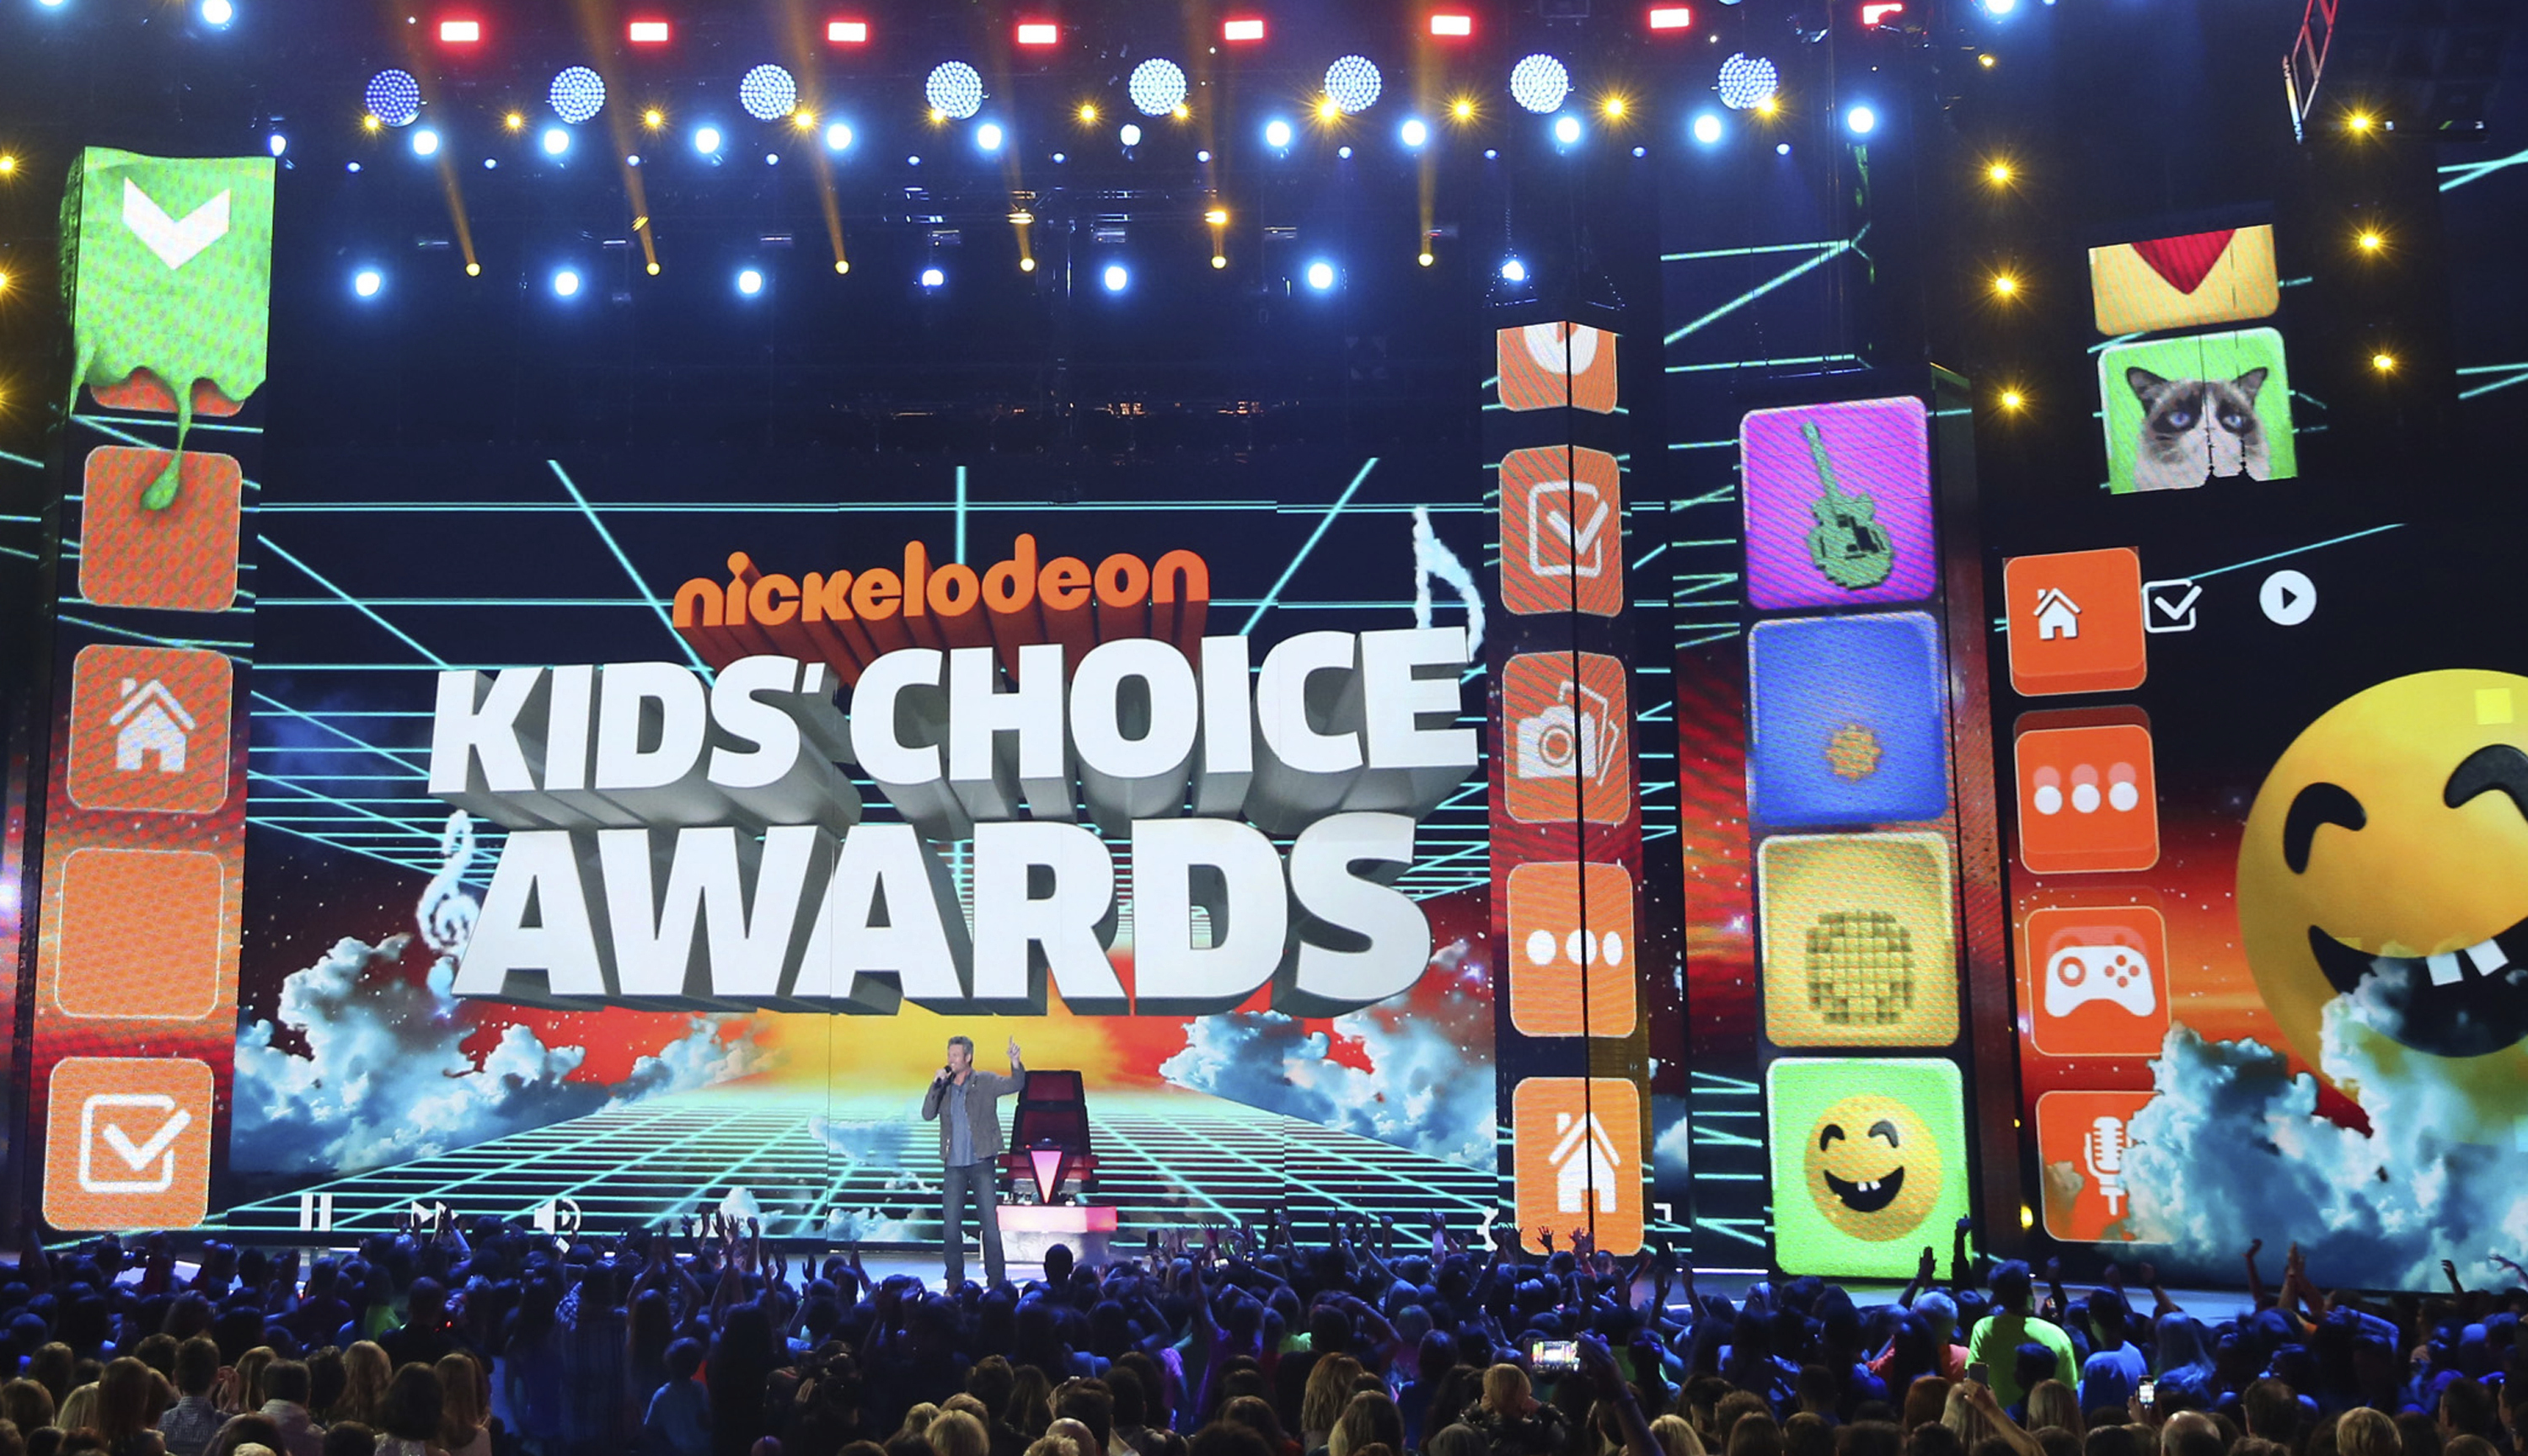 How To Watch Nickelodeon S Kids Choice Awards 2021 3 13 21 Nominees Tv Time Live Stream Info Syracuse Com - don't play roblox on march the 13th